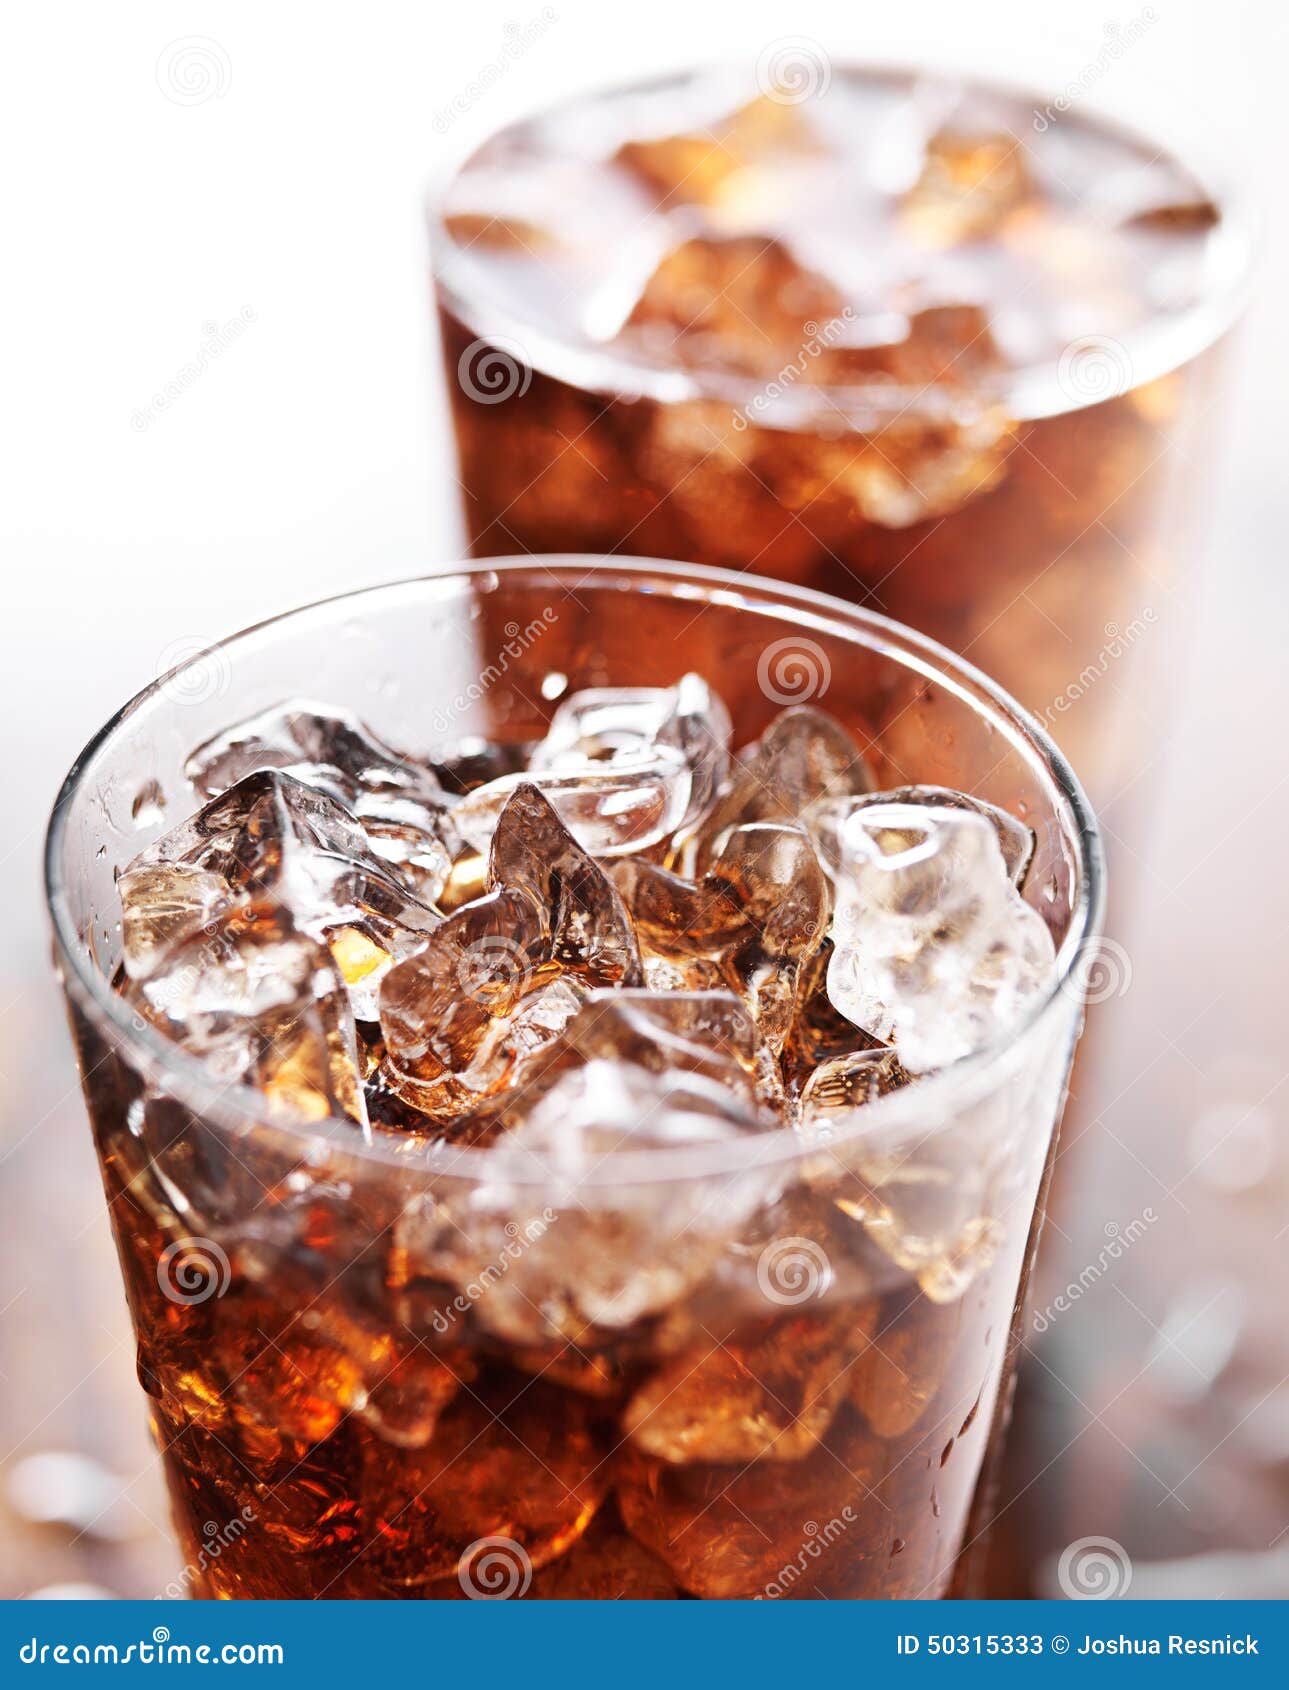 https://thumbs.dreamstime.com/z/glass-cup-cola-soda-ice-two-cups-shot-selective-focus-50315333.jpg